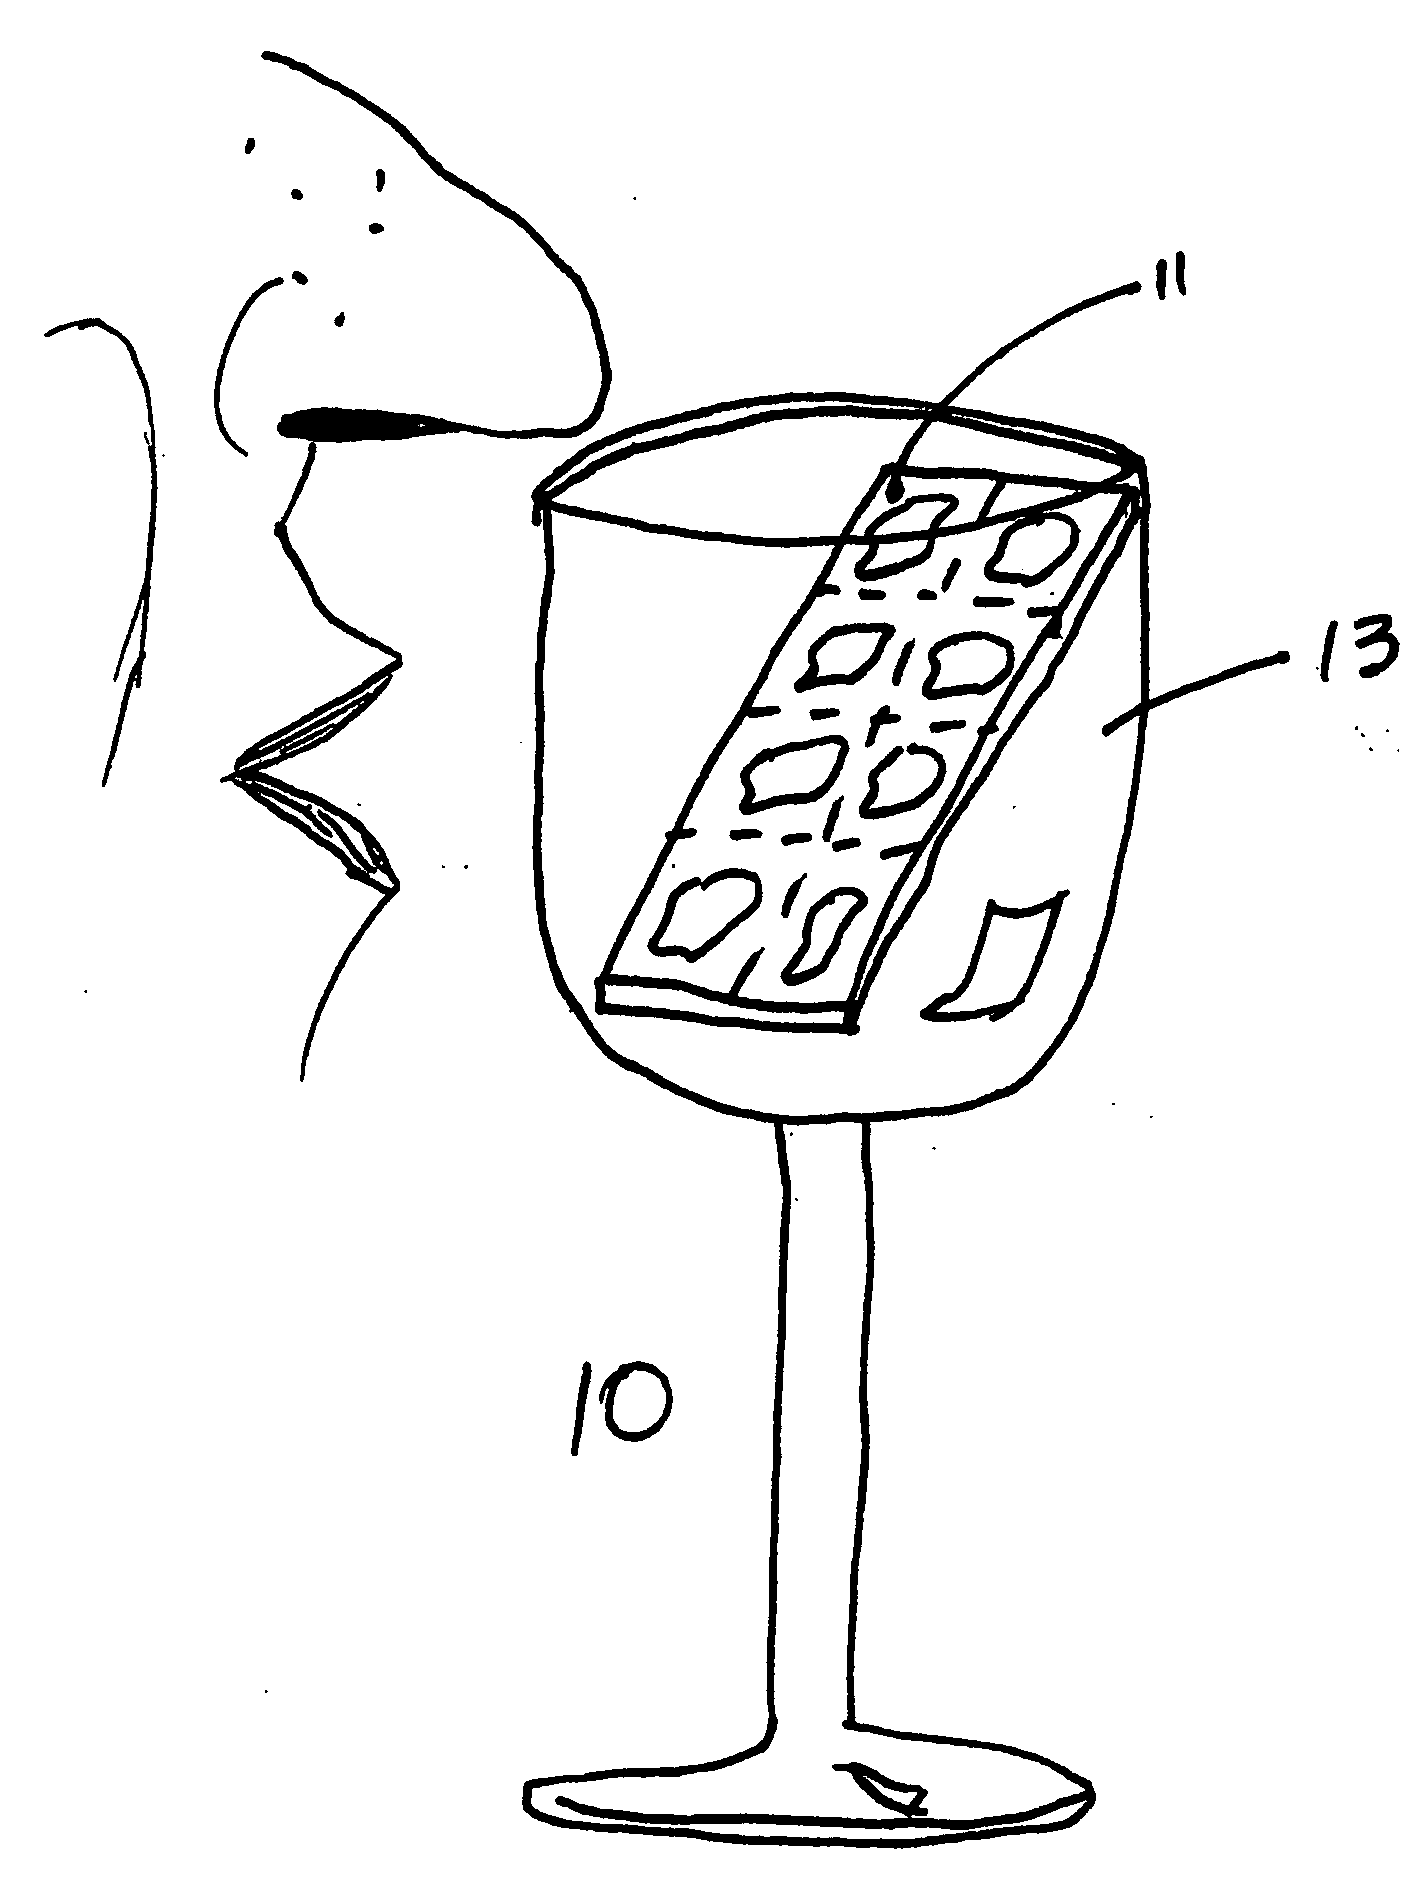 Method and apparatus for enhancing tasting experiences